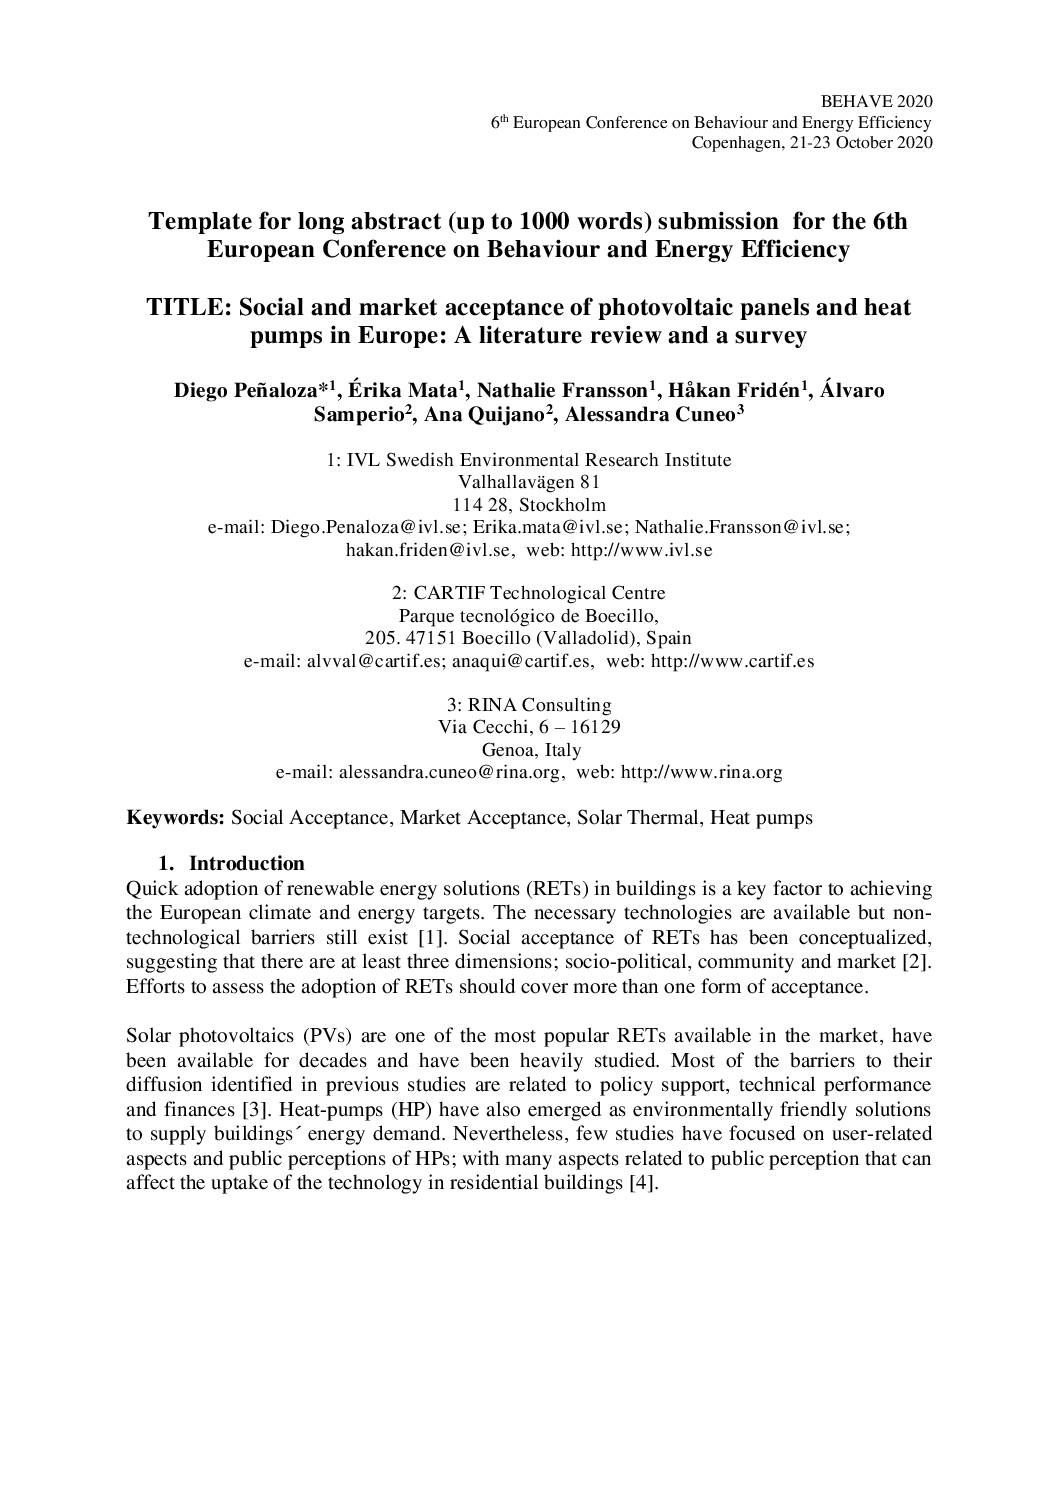 Social and market acceptance of photovoltaic panels and heat pumps in Europe: A literature review and a survey